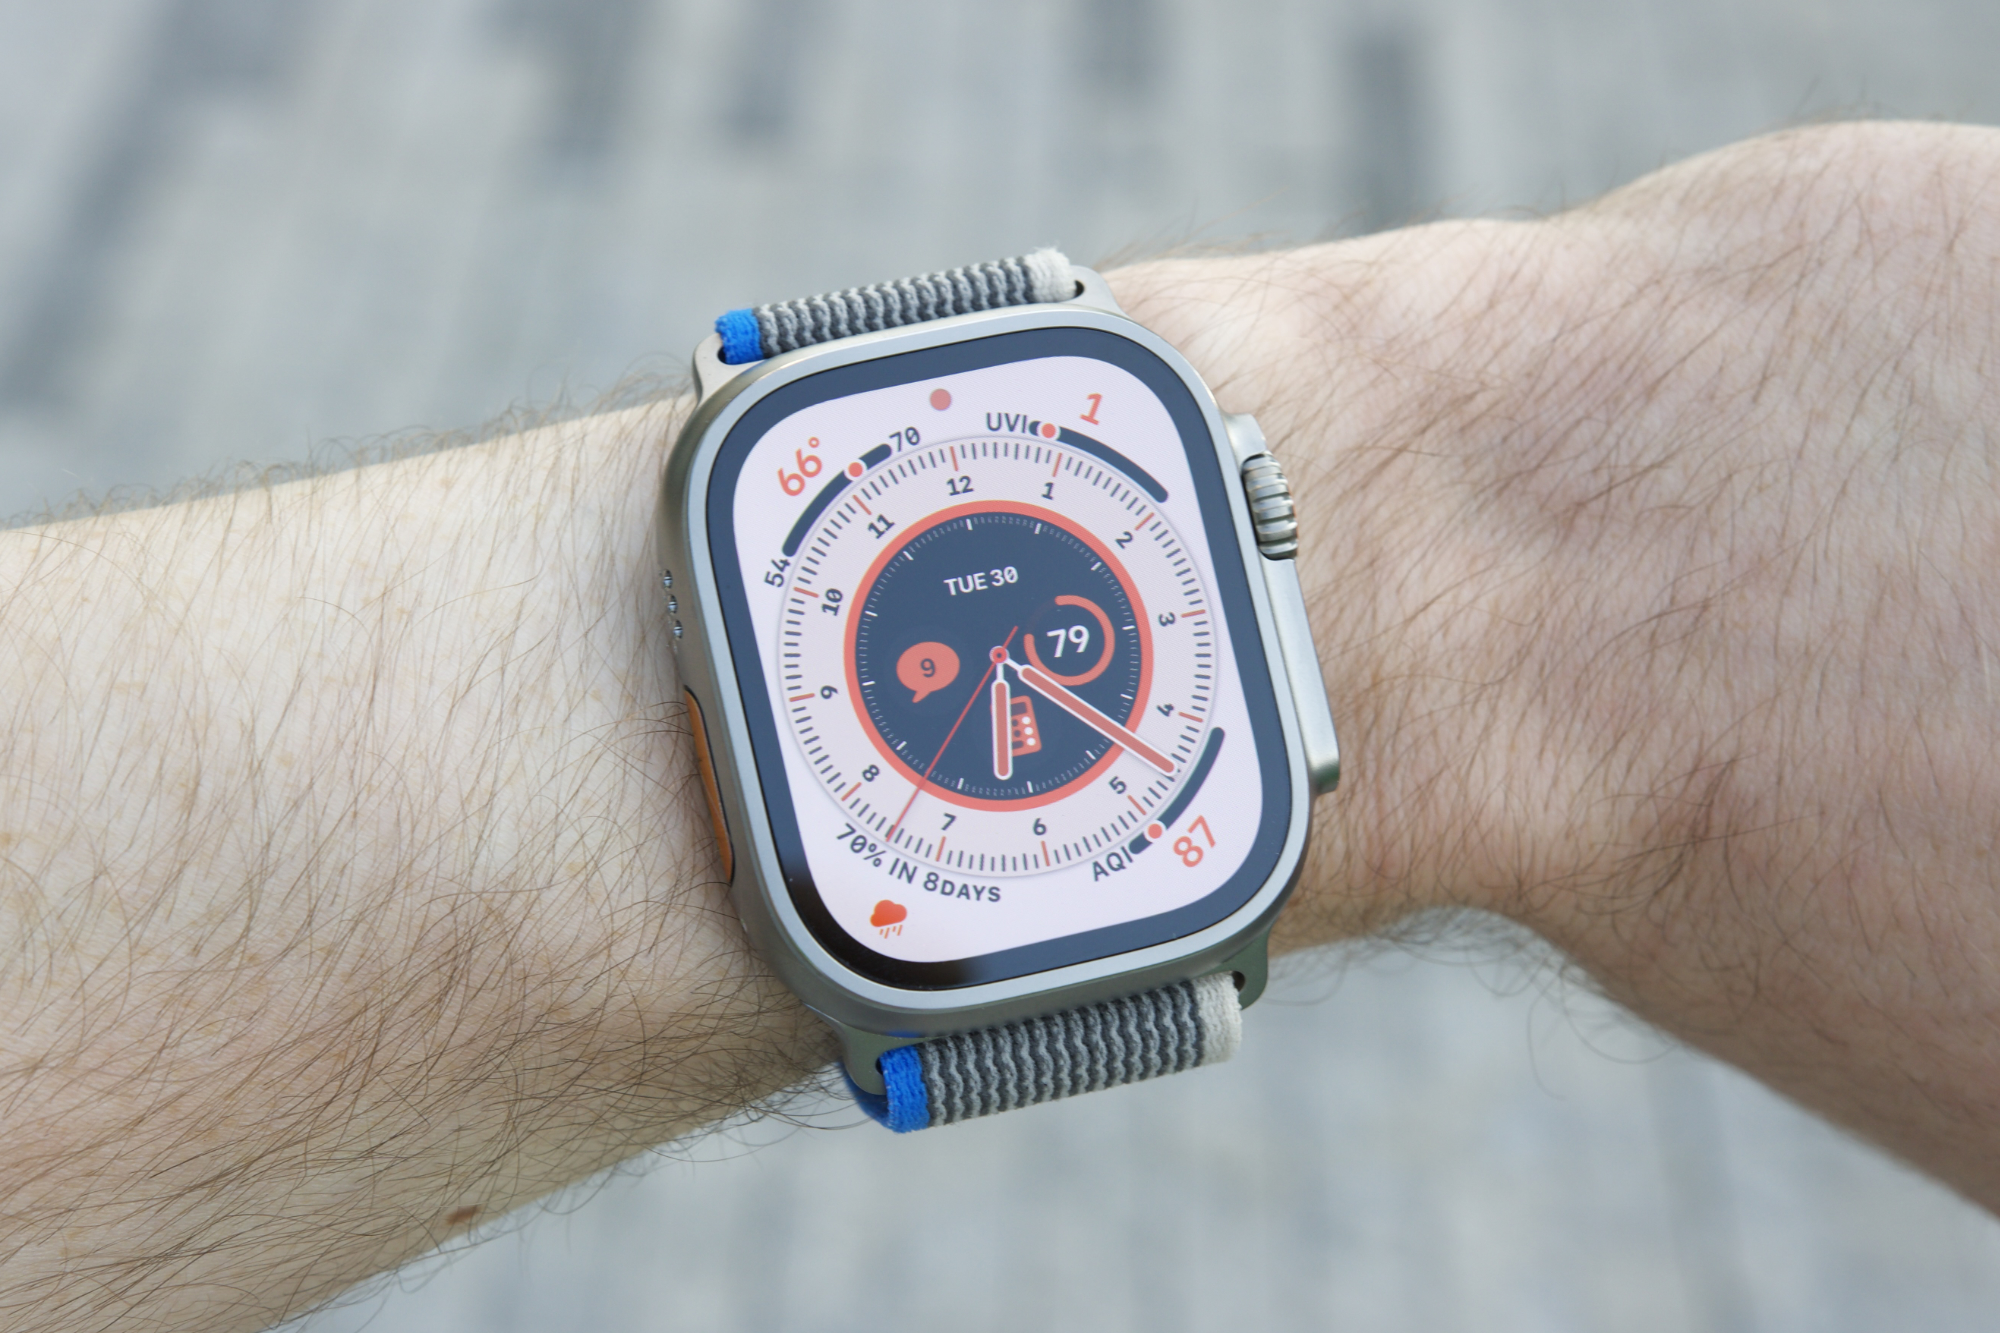 I finally got an Apple Watch Ultra. Here are 3 ways it surprised me